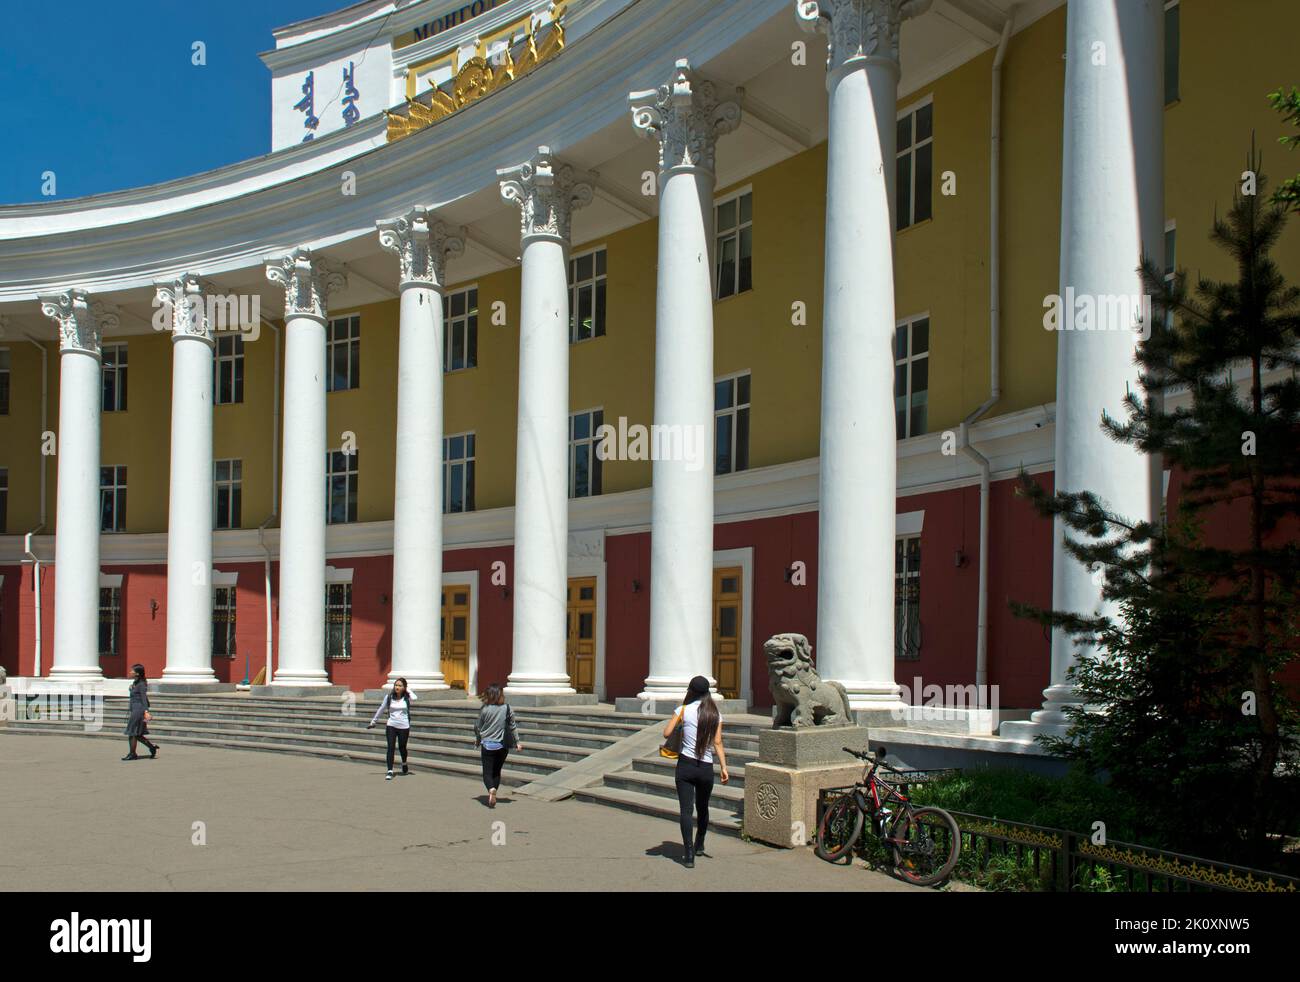 Colonnade at the entrance to the National University of Mongolia, Ulaanbaatar, Mongolia Stock Photo